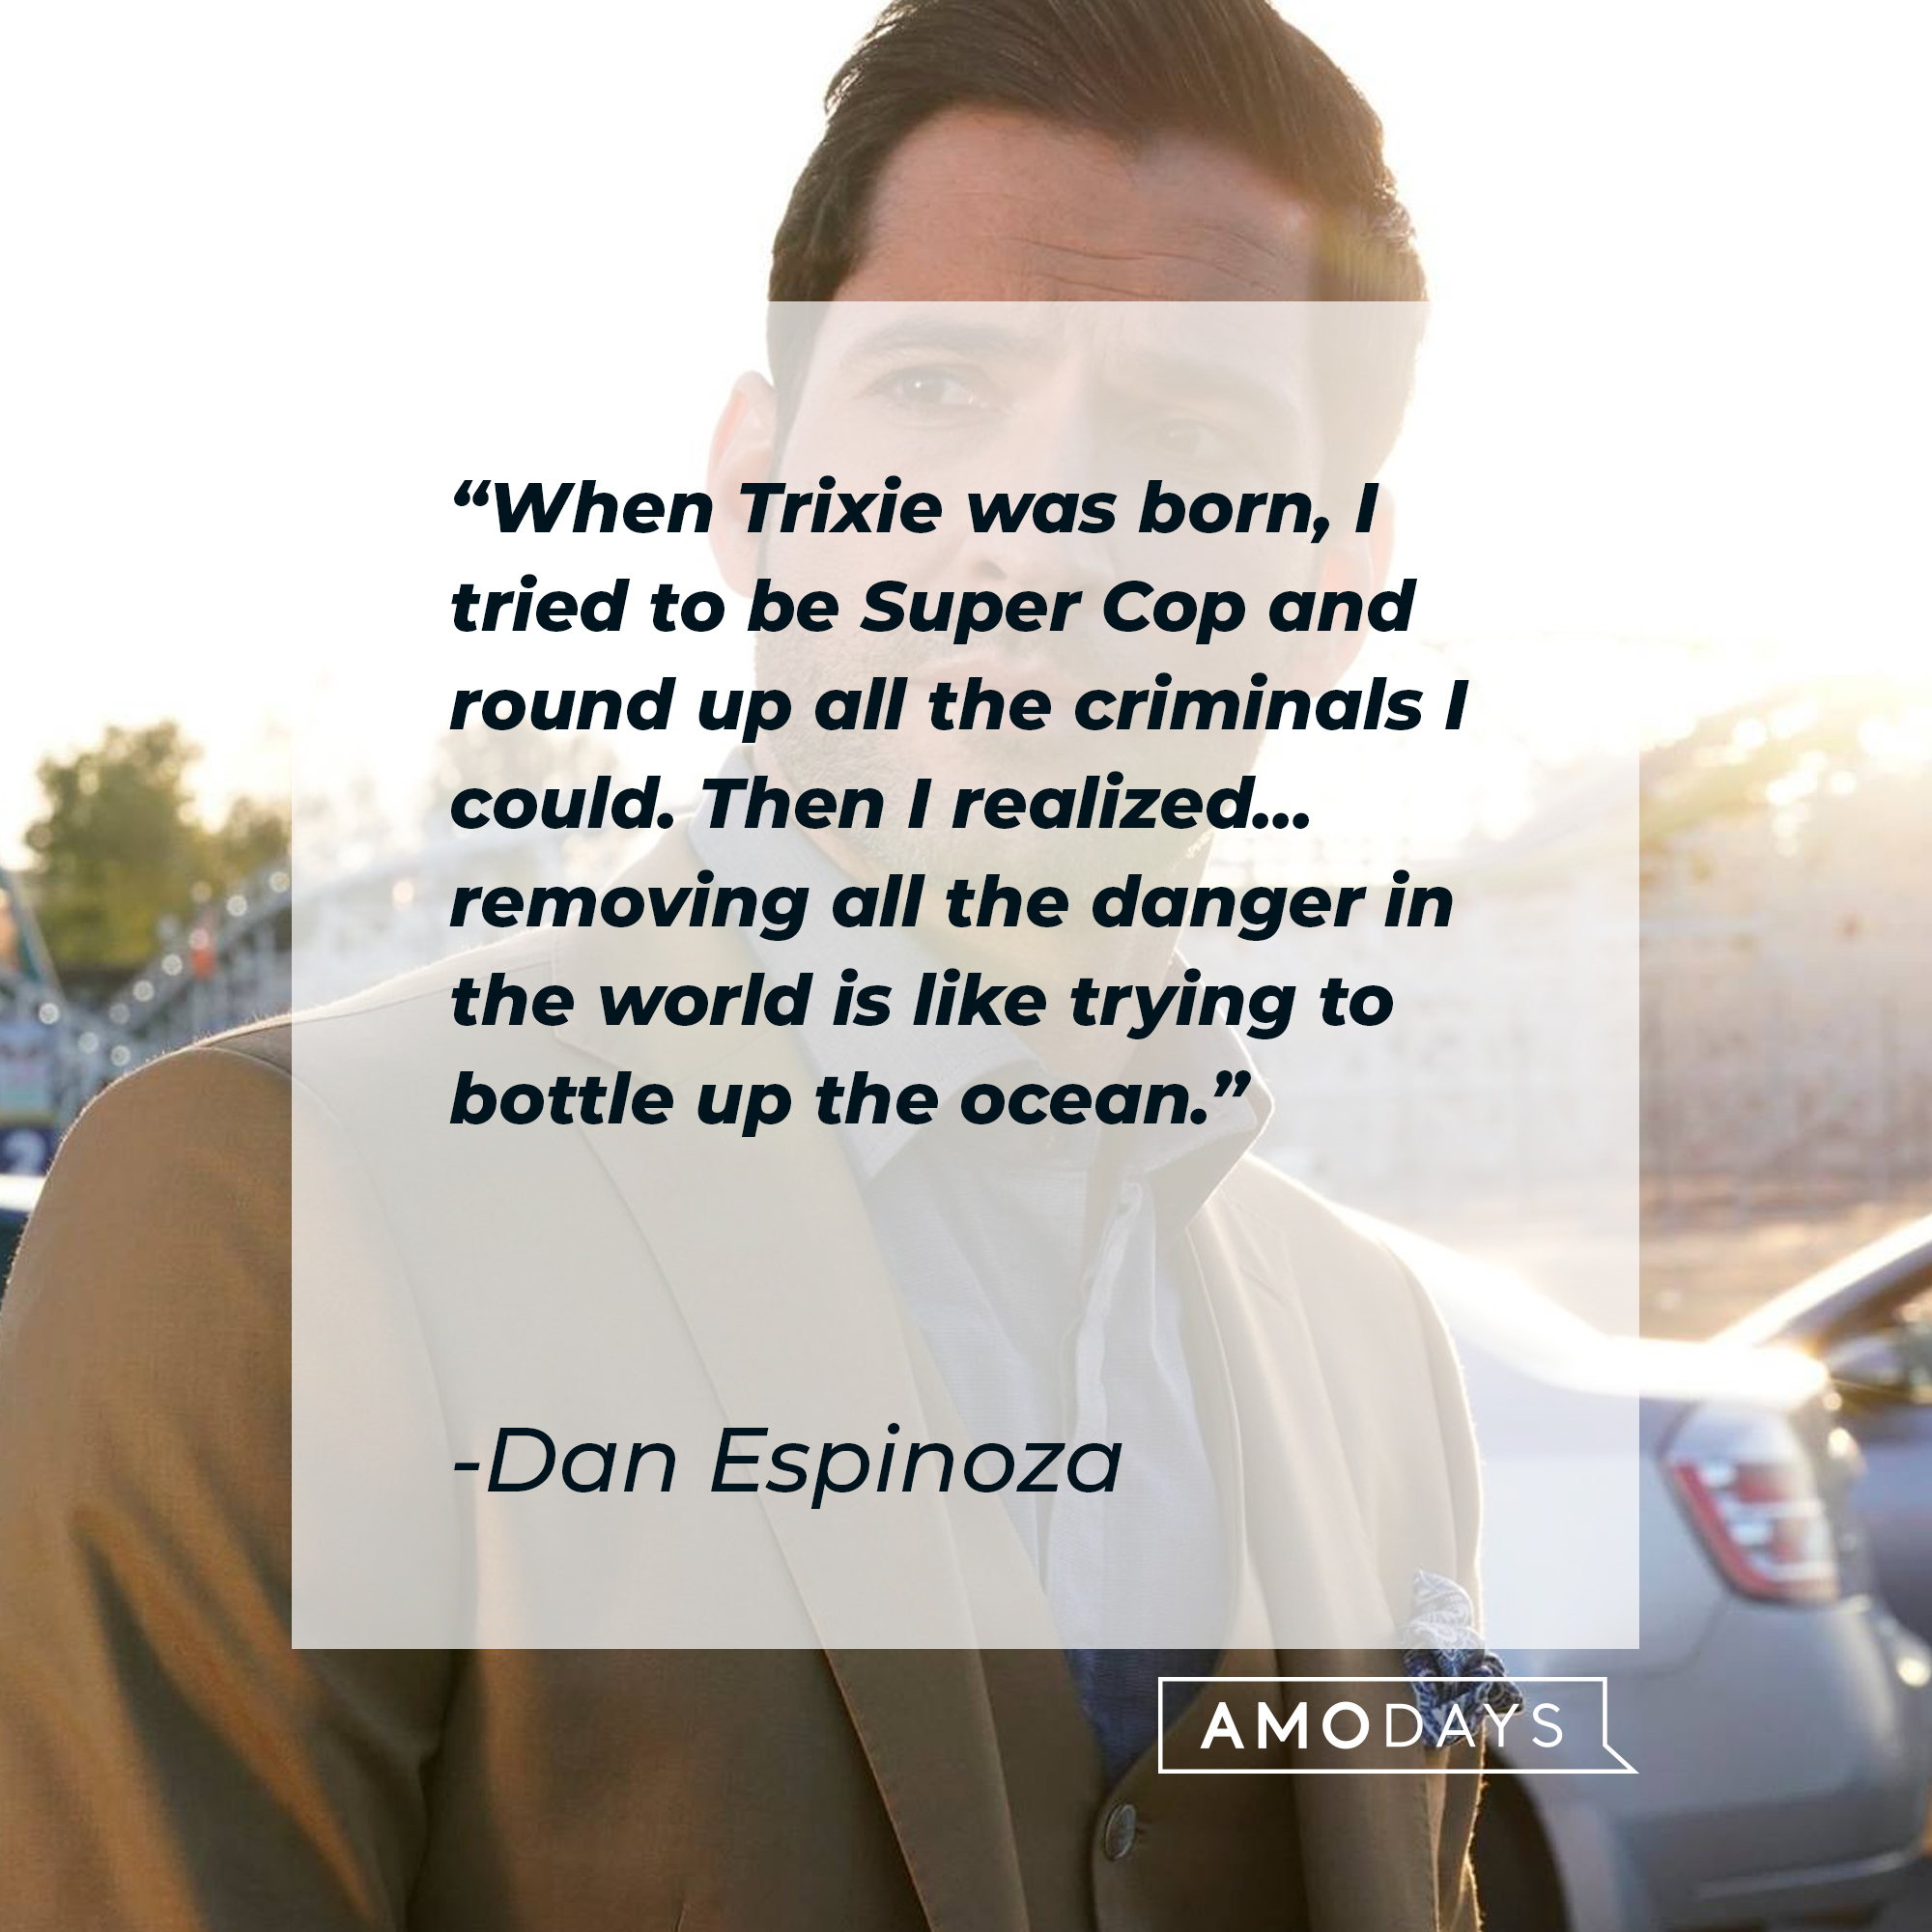 Dan Espinoza’s quote: "When Trixie was born, I tried to be Super Cop and round up all the criminals I could. Then I realized… removing all the danger in the world is like trying to bottle up the ocean." | Source: Facebook.com/LuciferNetflix